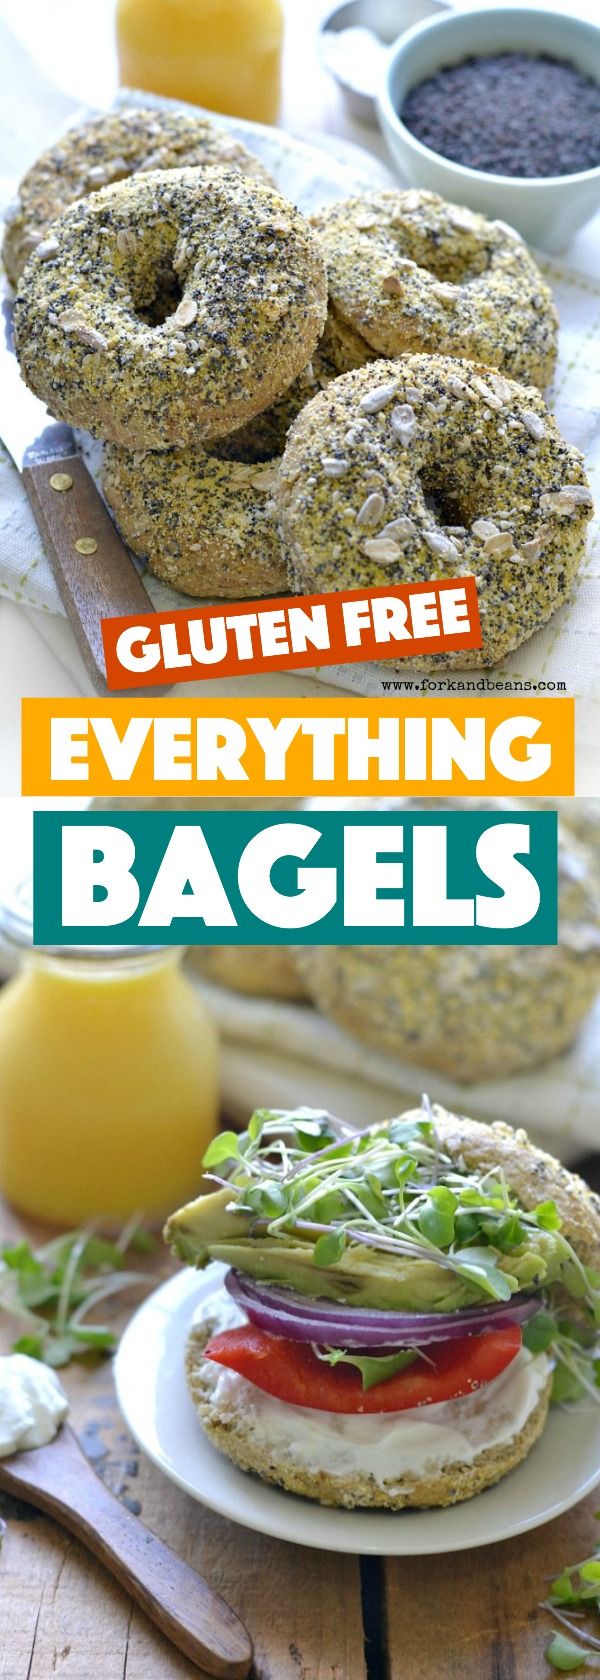 With a crunchy exterior and a soft interior, these gluten free vegan everything bagels will brighten anyone's morning. Just toast and then slather with cream cheese!